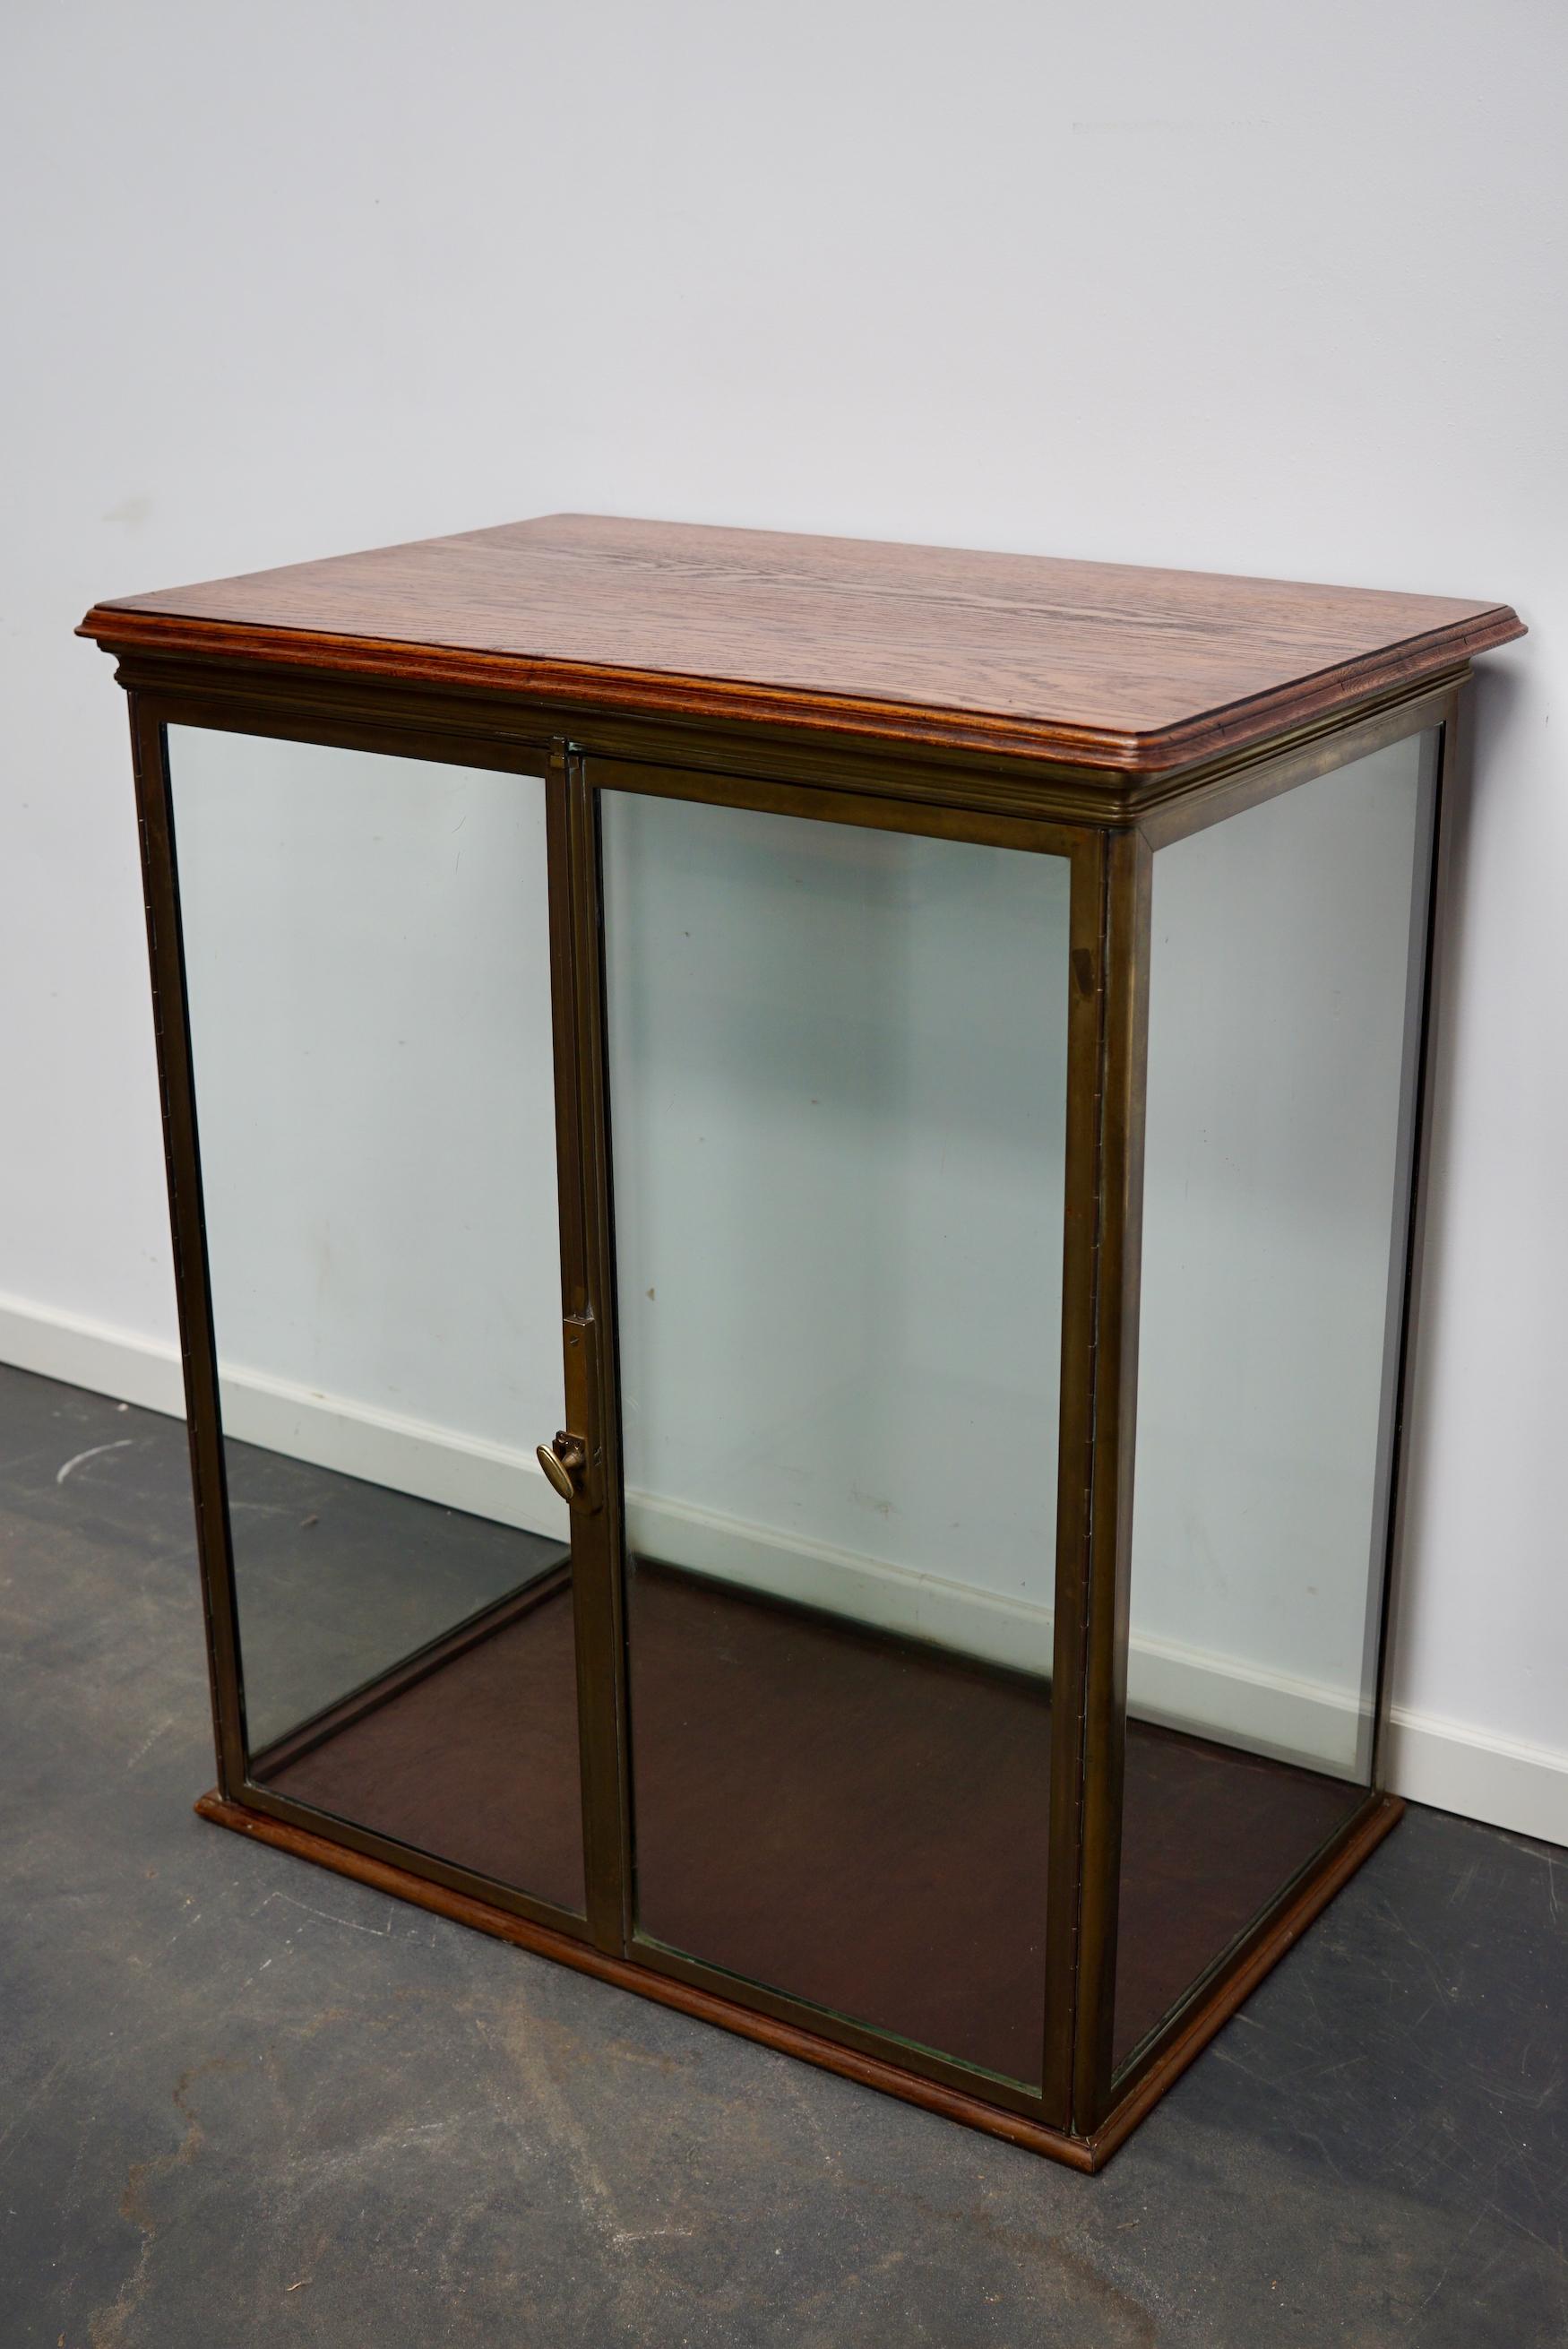 This very nice brass and glass vitrine was designed and made around the 1920s in France. It was made from brass and finished with an oak top. The build quality of the item is very solid.